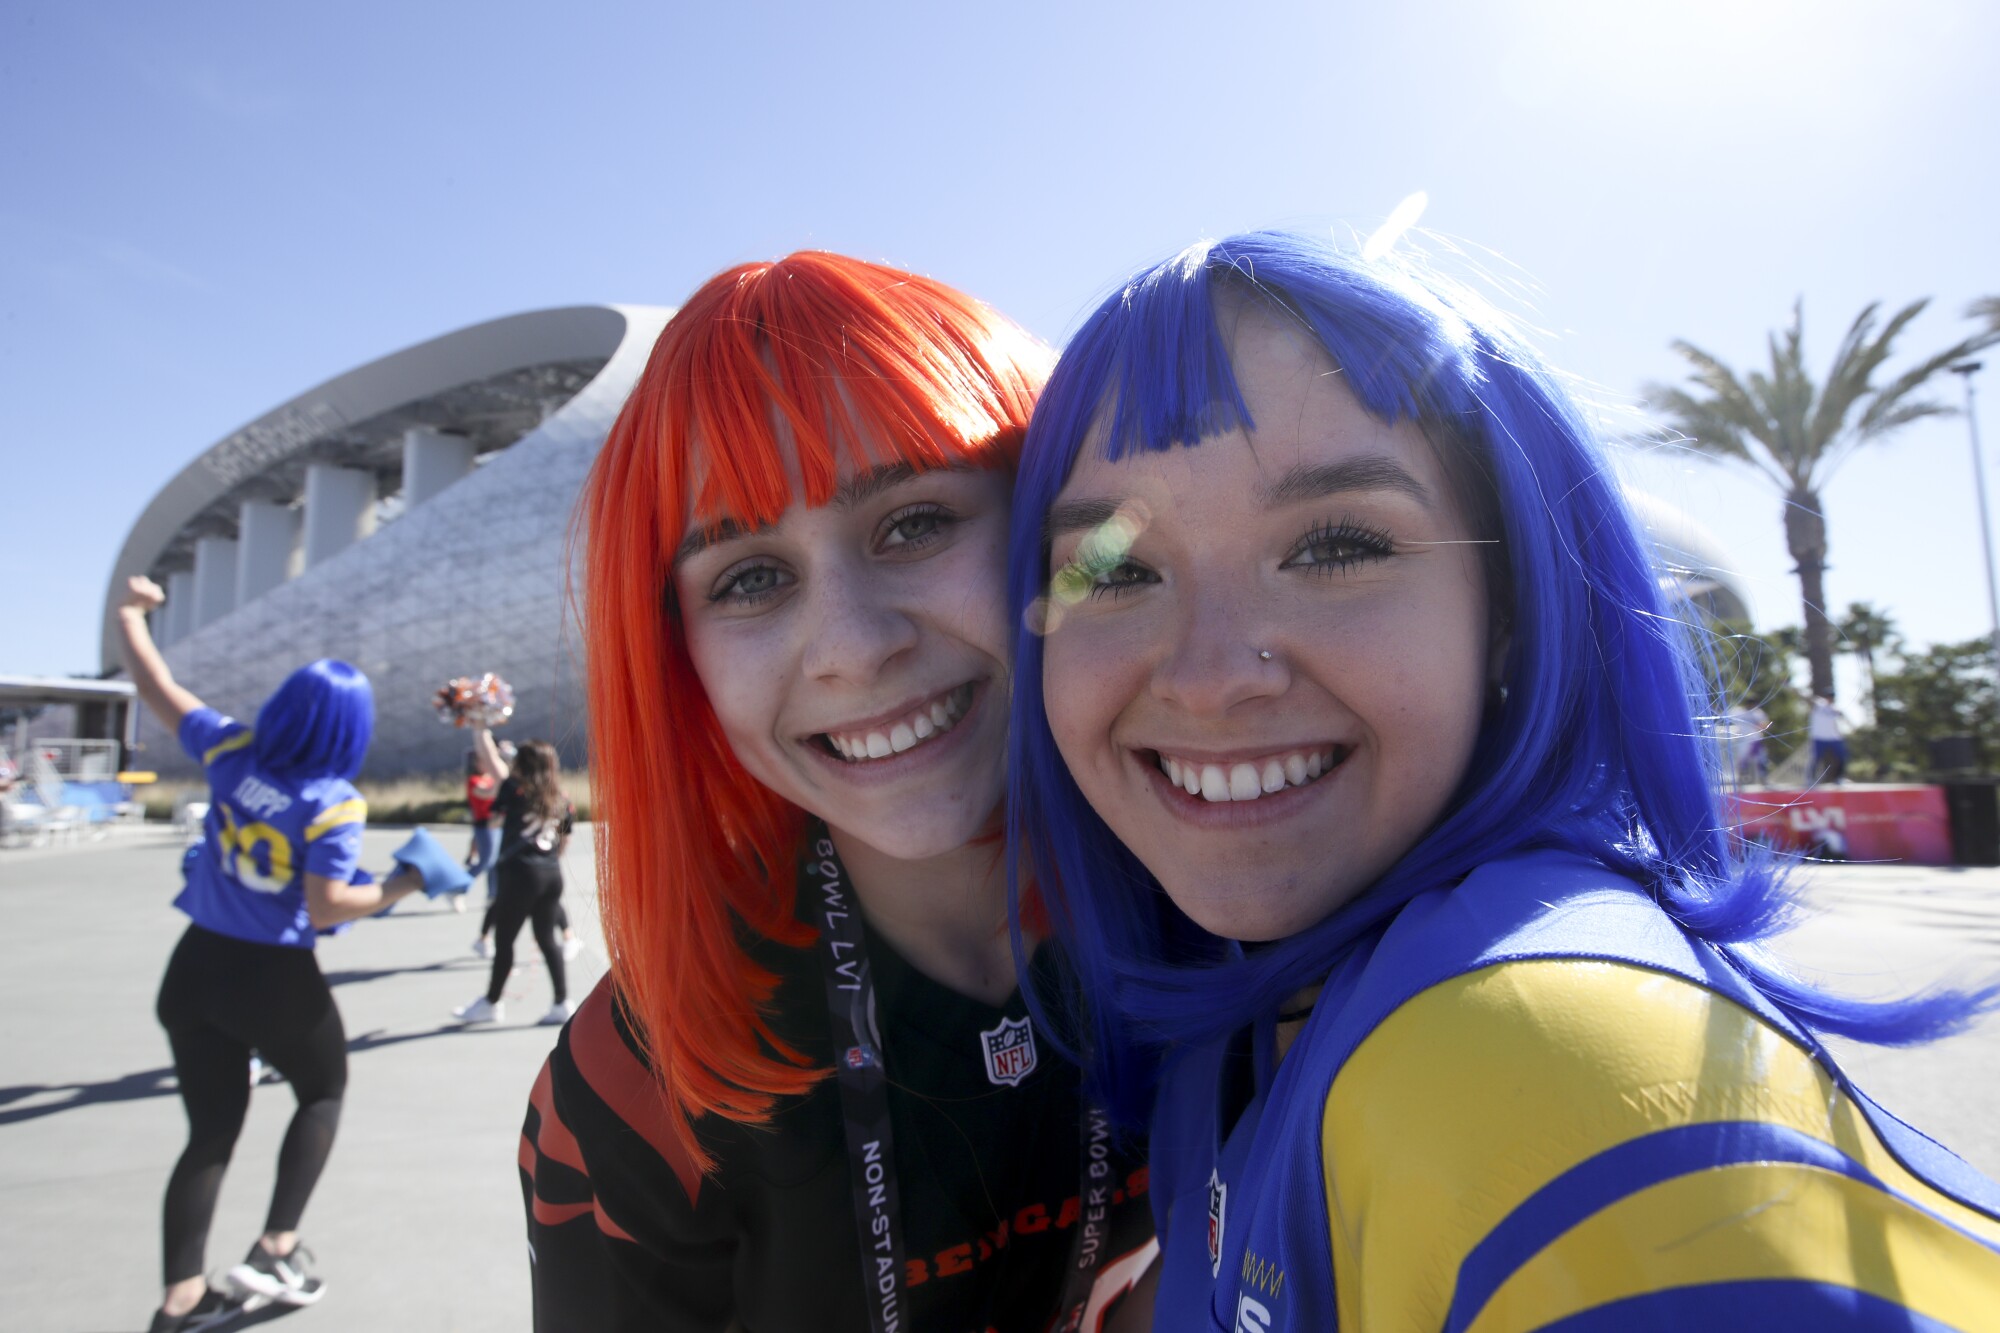 Rams and Bengals fans sport their team's colors before Super Bowl LVI at SoFi Stadium.